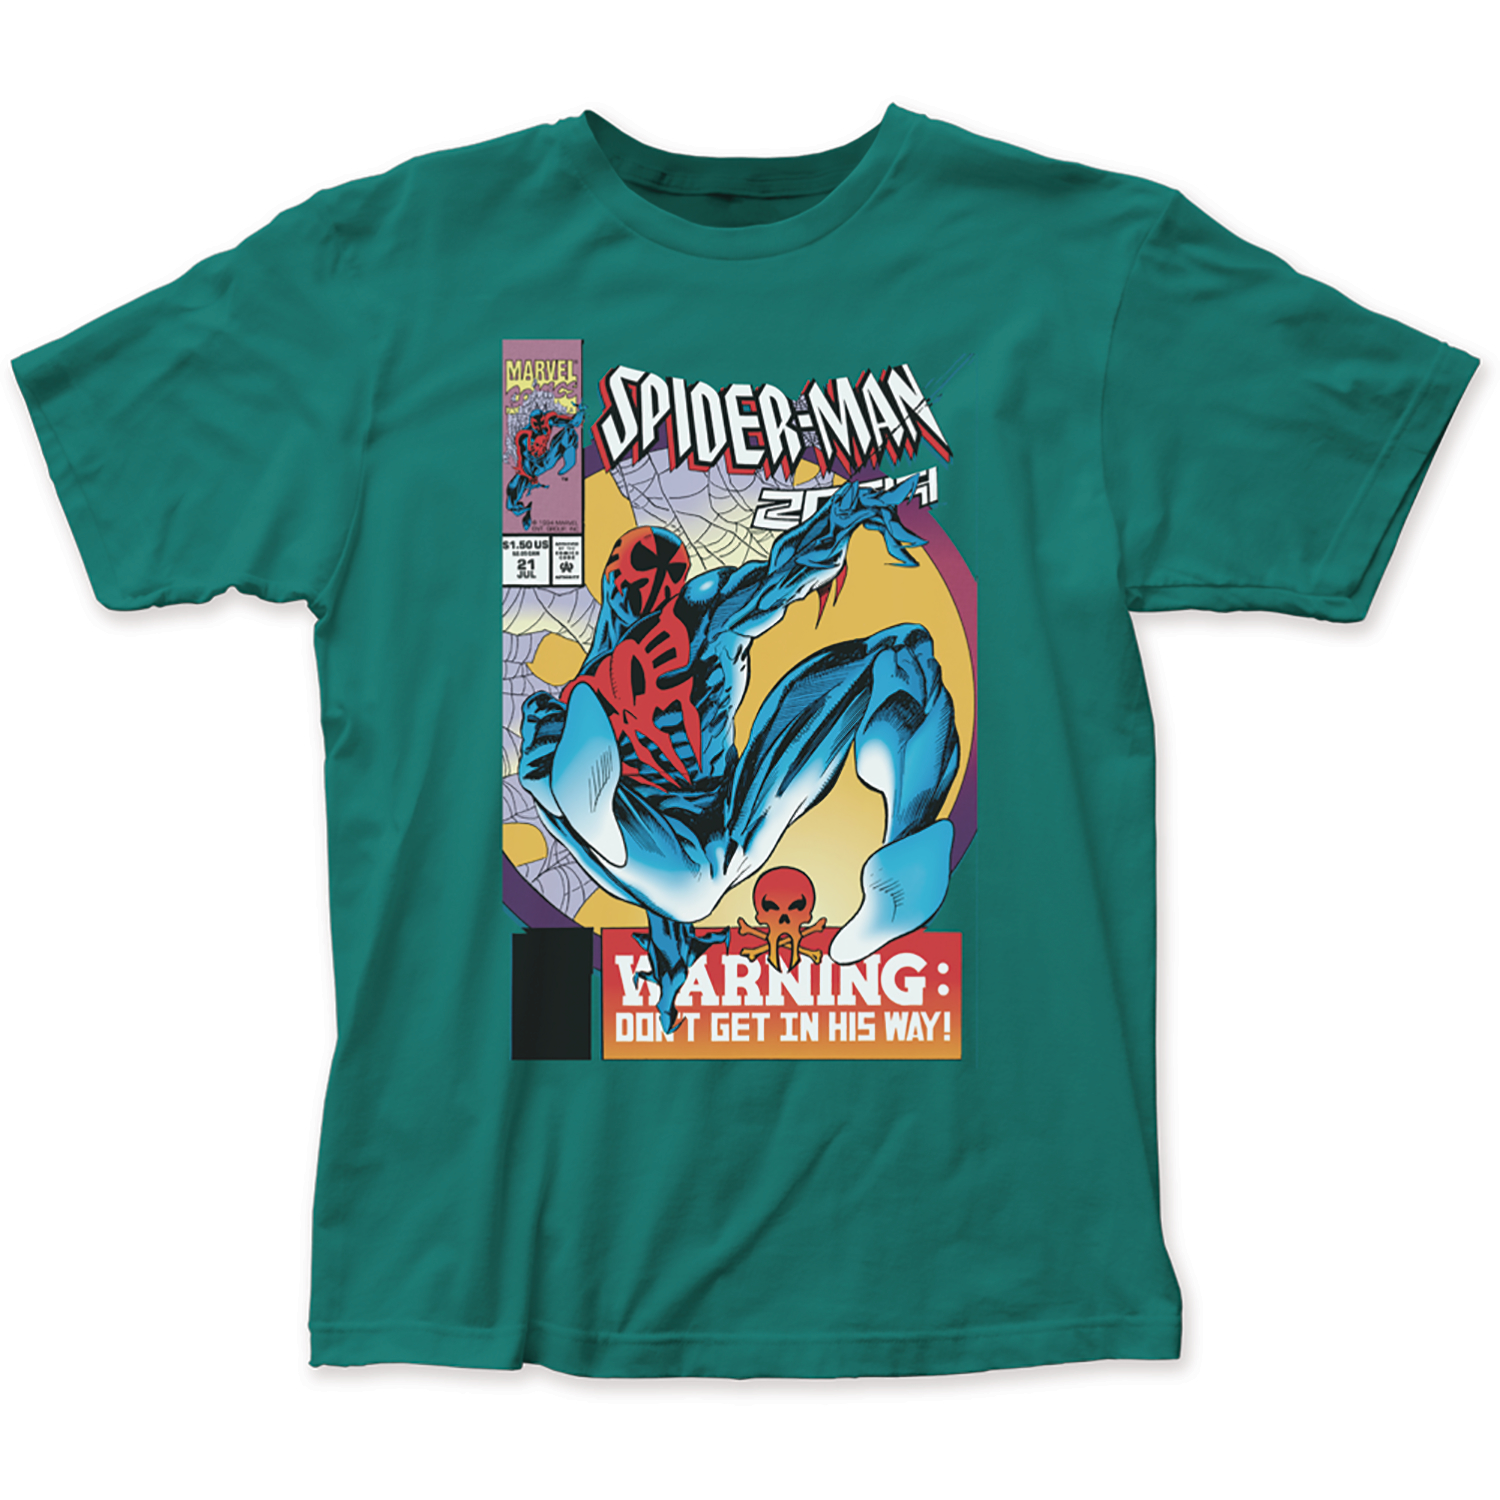 Marvel Spider-Man Dont Get In His Way Px T-Shirt XL